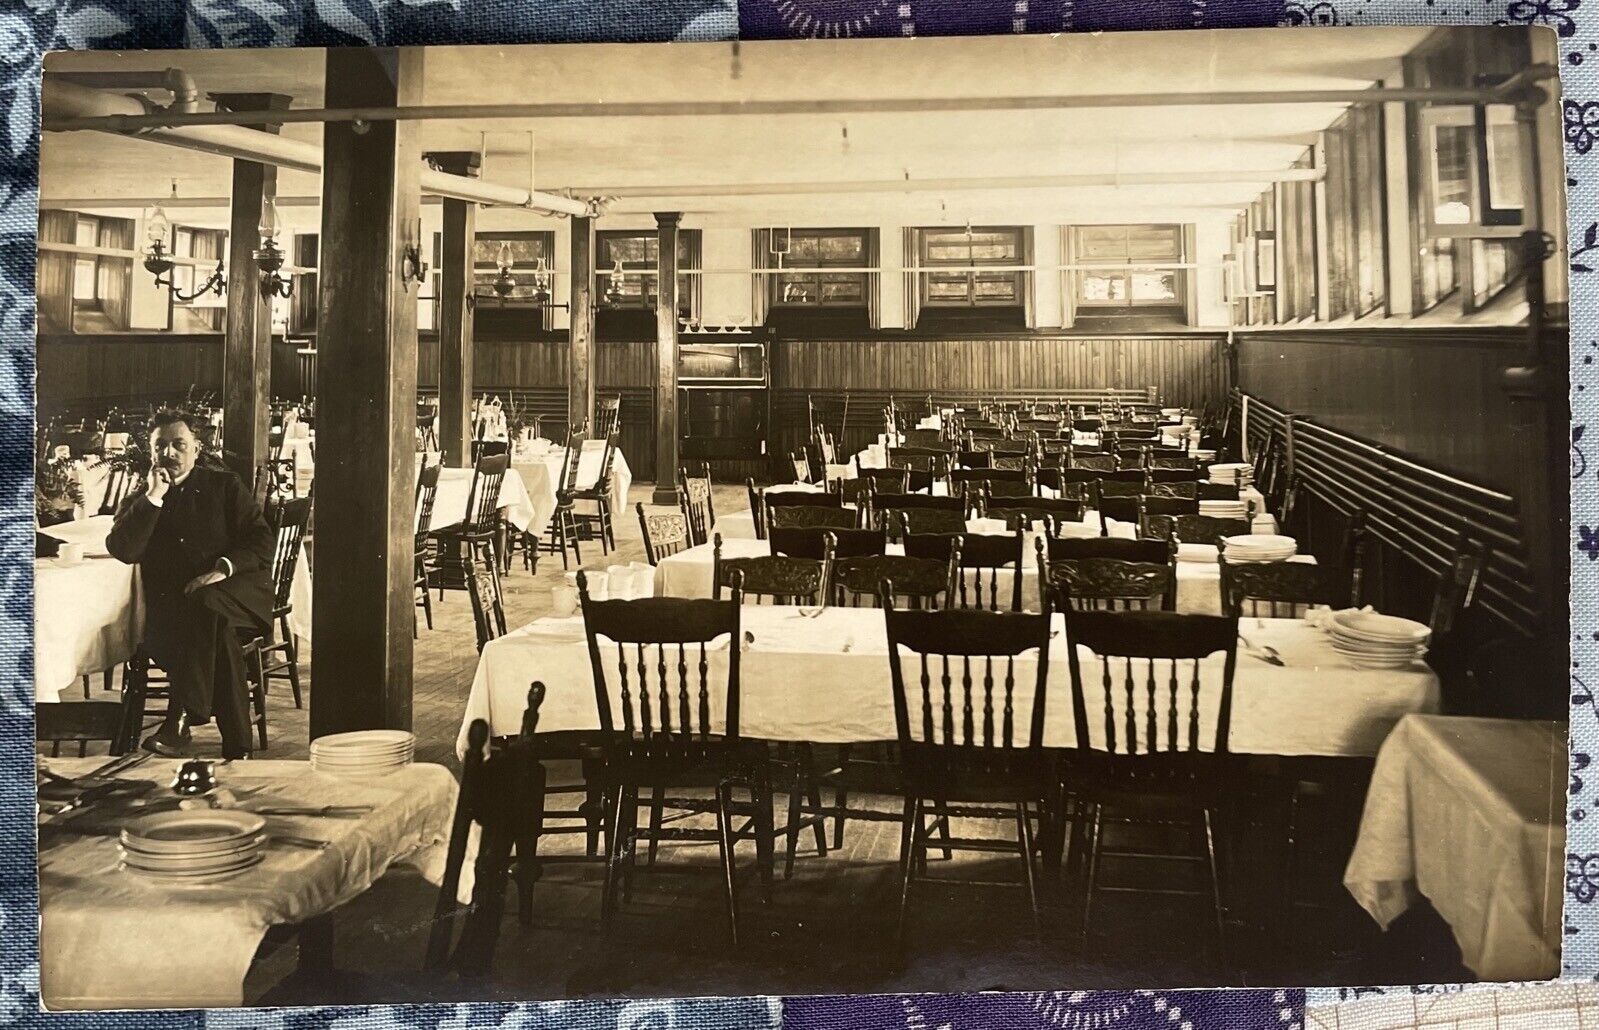 Pointe-aux-Trembles Instituts. Dr. Brandt. Dining Hall. Real Photo Postcard. 